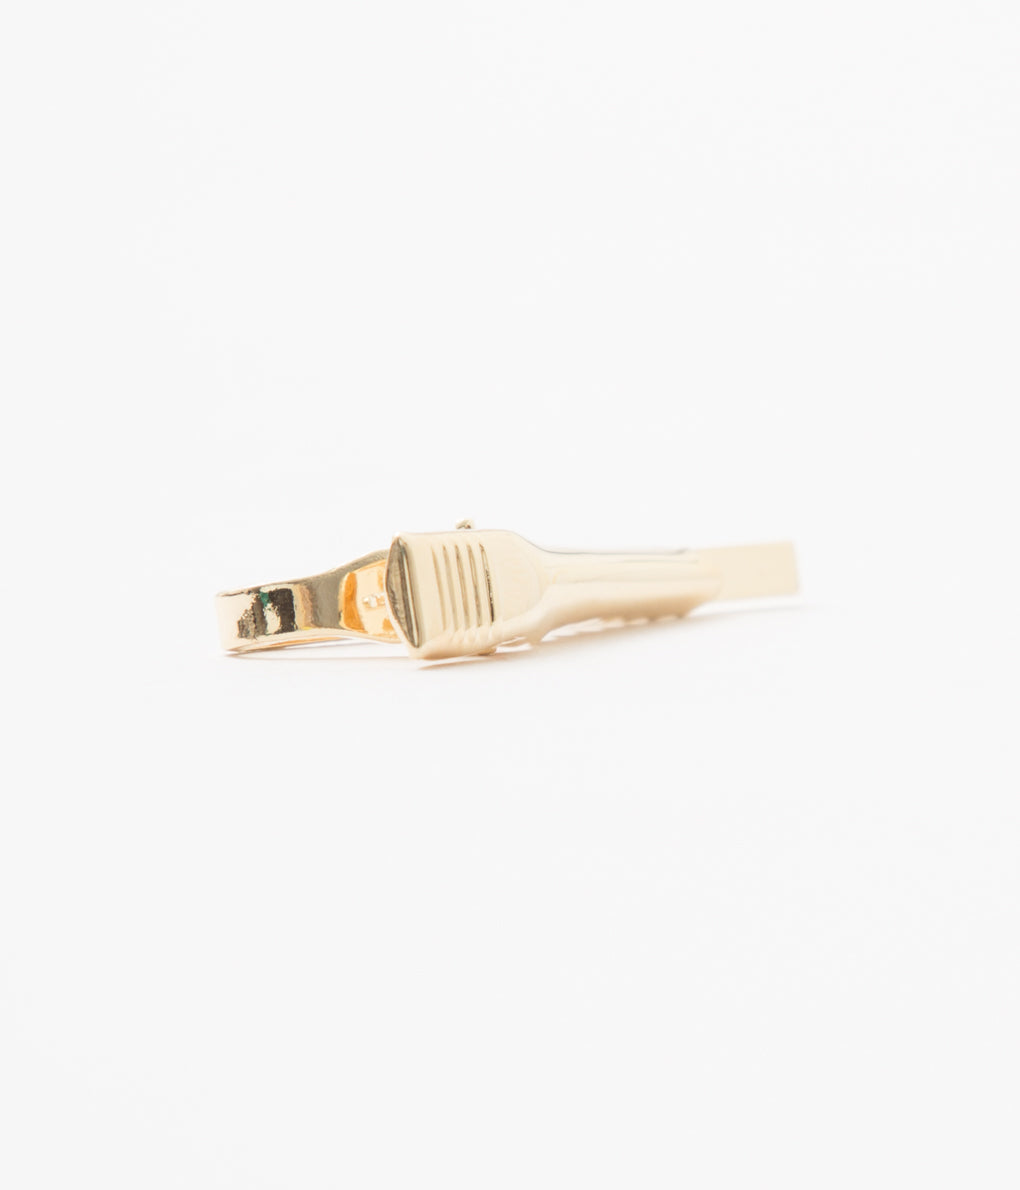 FINE AND DANDY "TIE BARS SKINNY" (GOLD)